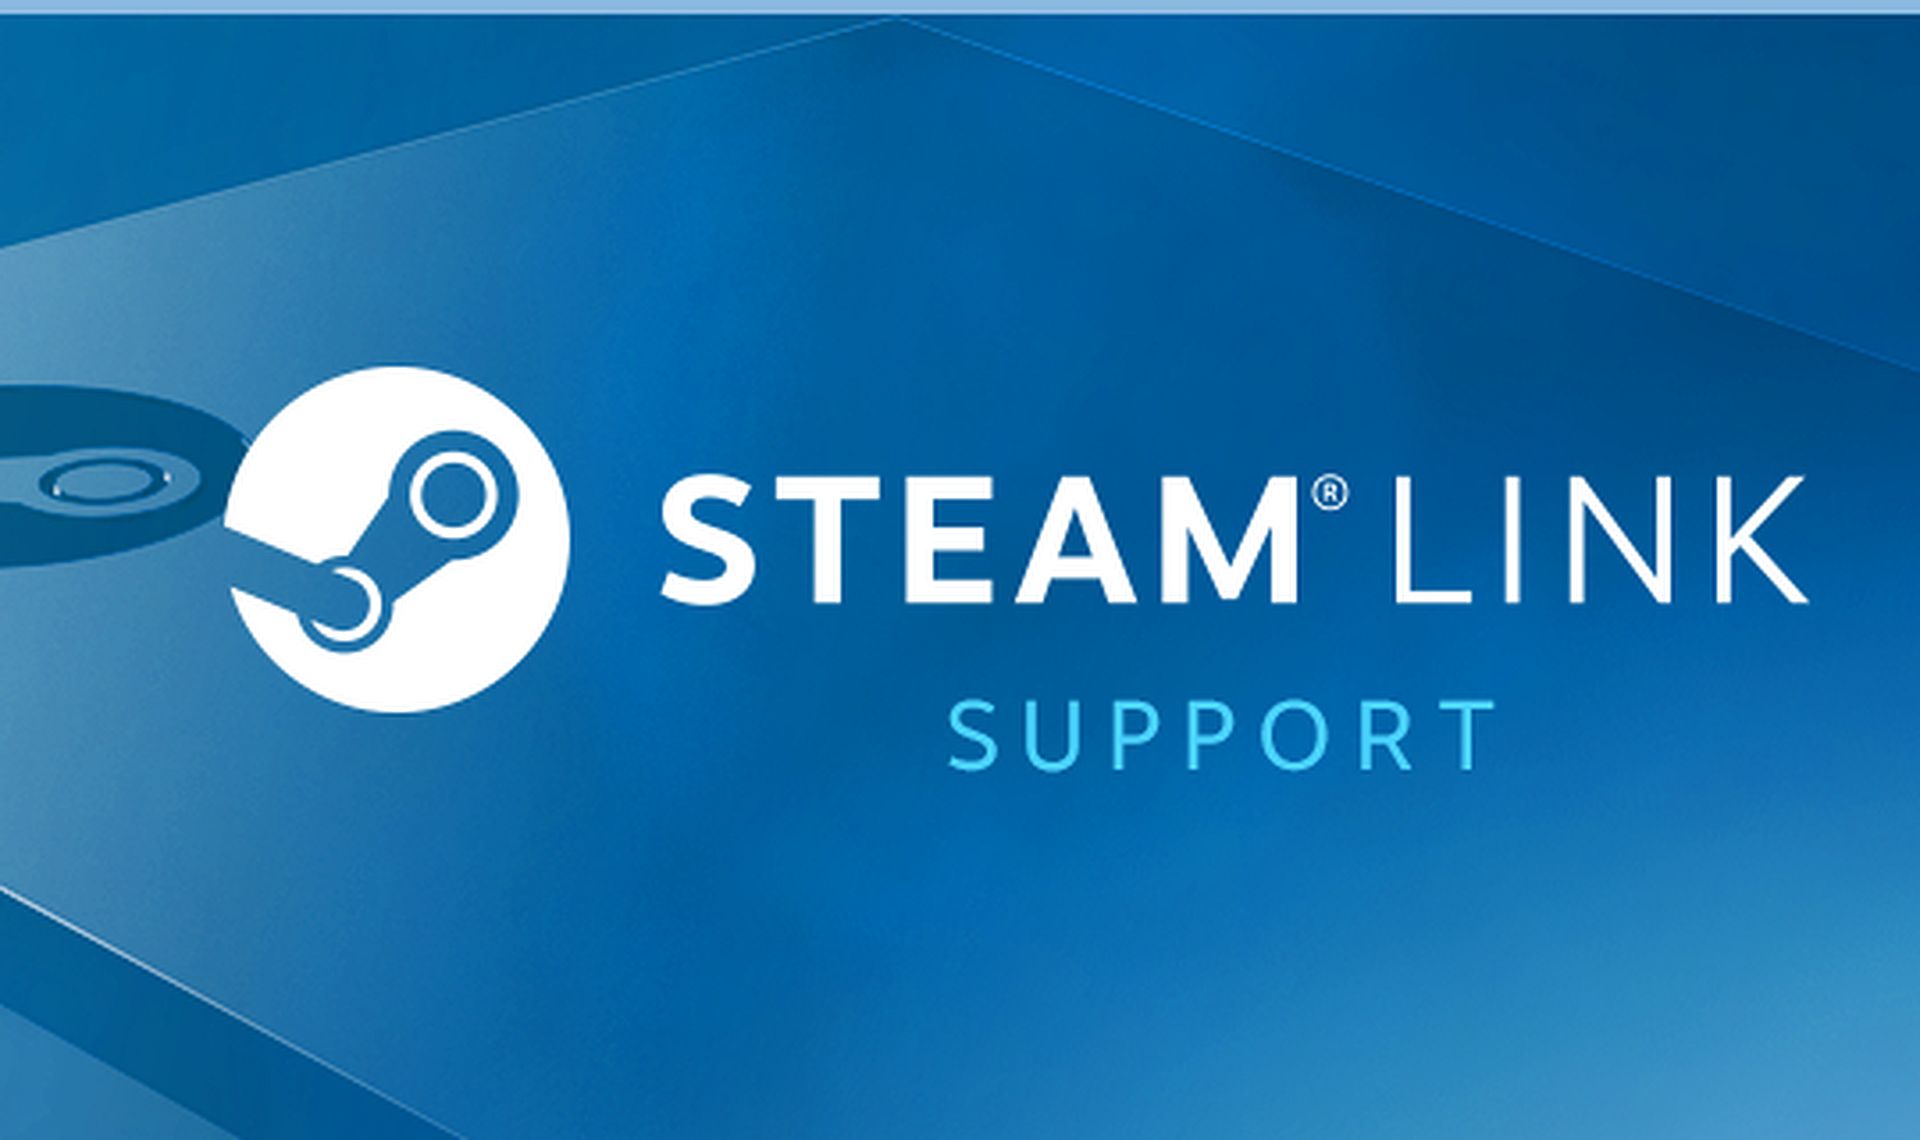 Is Steam unlocked legit and safe? • TechBriefly